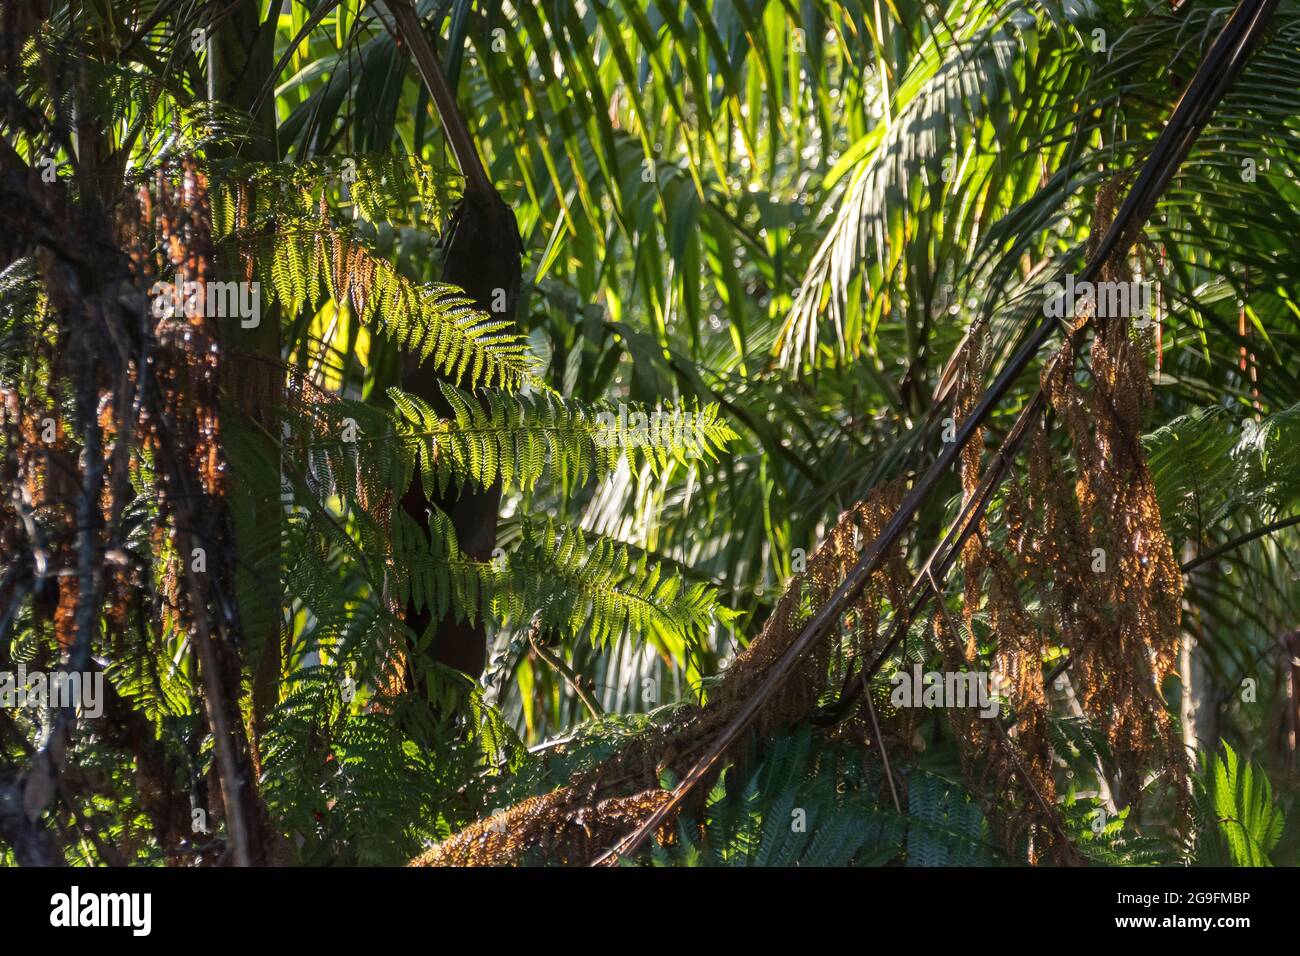 Fronds of Lacy Fern Tree (Cyathea cooperi) and Bangalow palms (Archontophoenix cunninghamiana) in subtropical rainforest, Queensland, Australia. Stock Photo